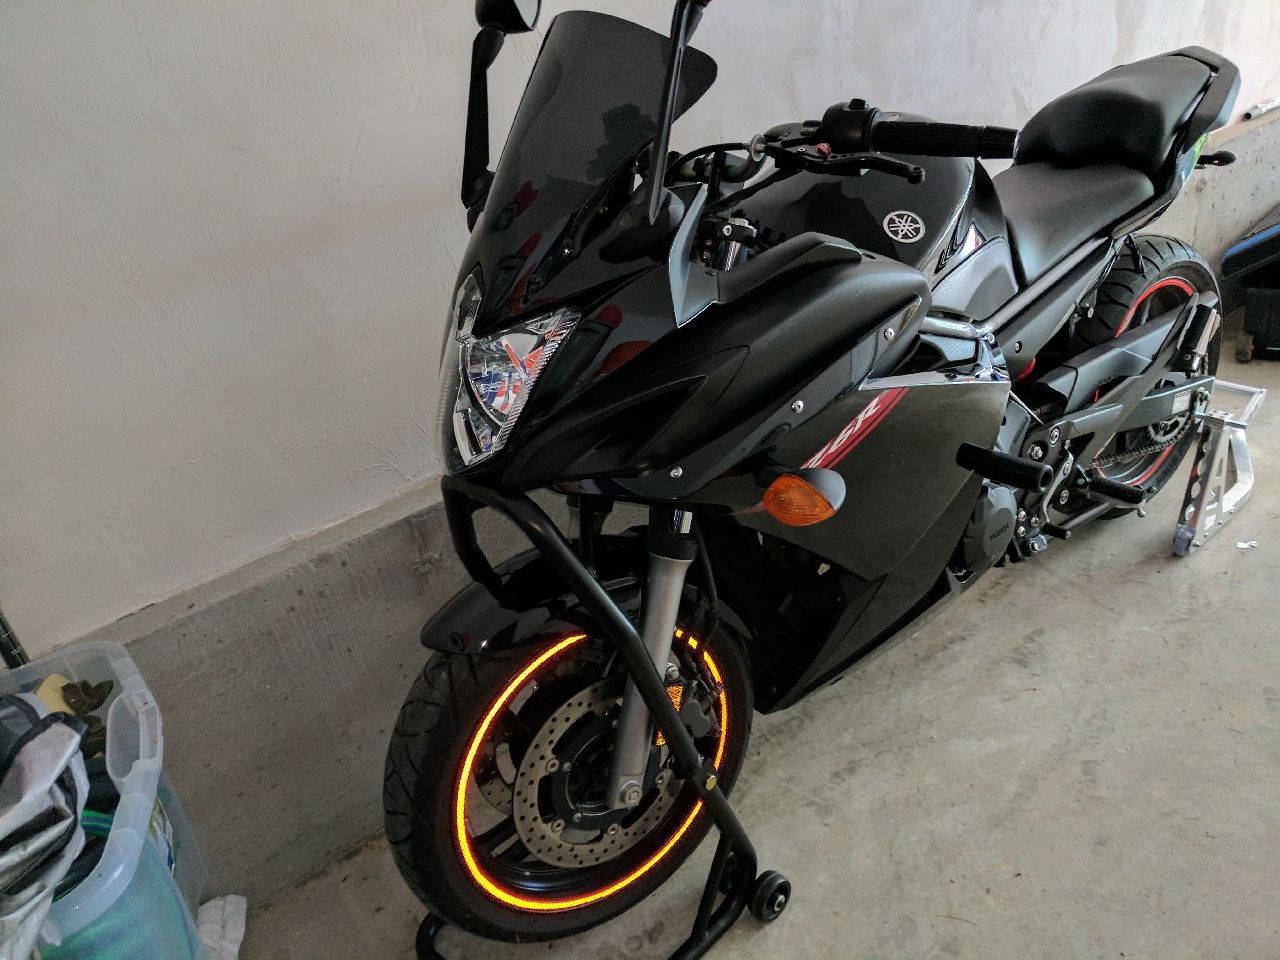 Fz6r. End of summer deal!!!! 4k or a trade for car,camper or boat